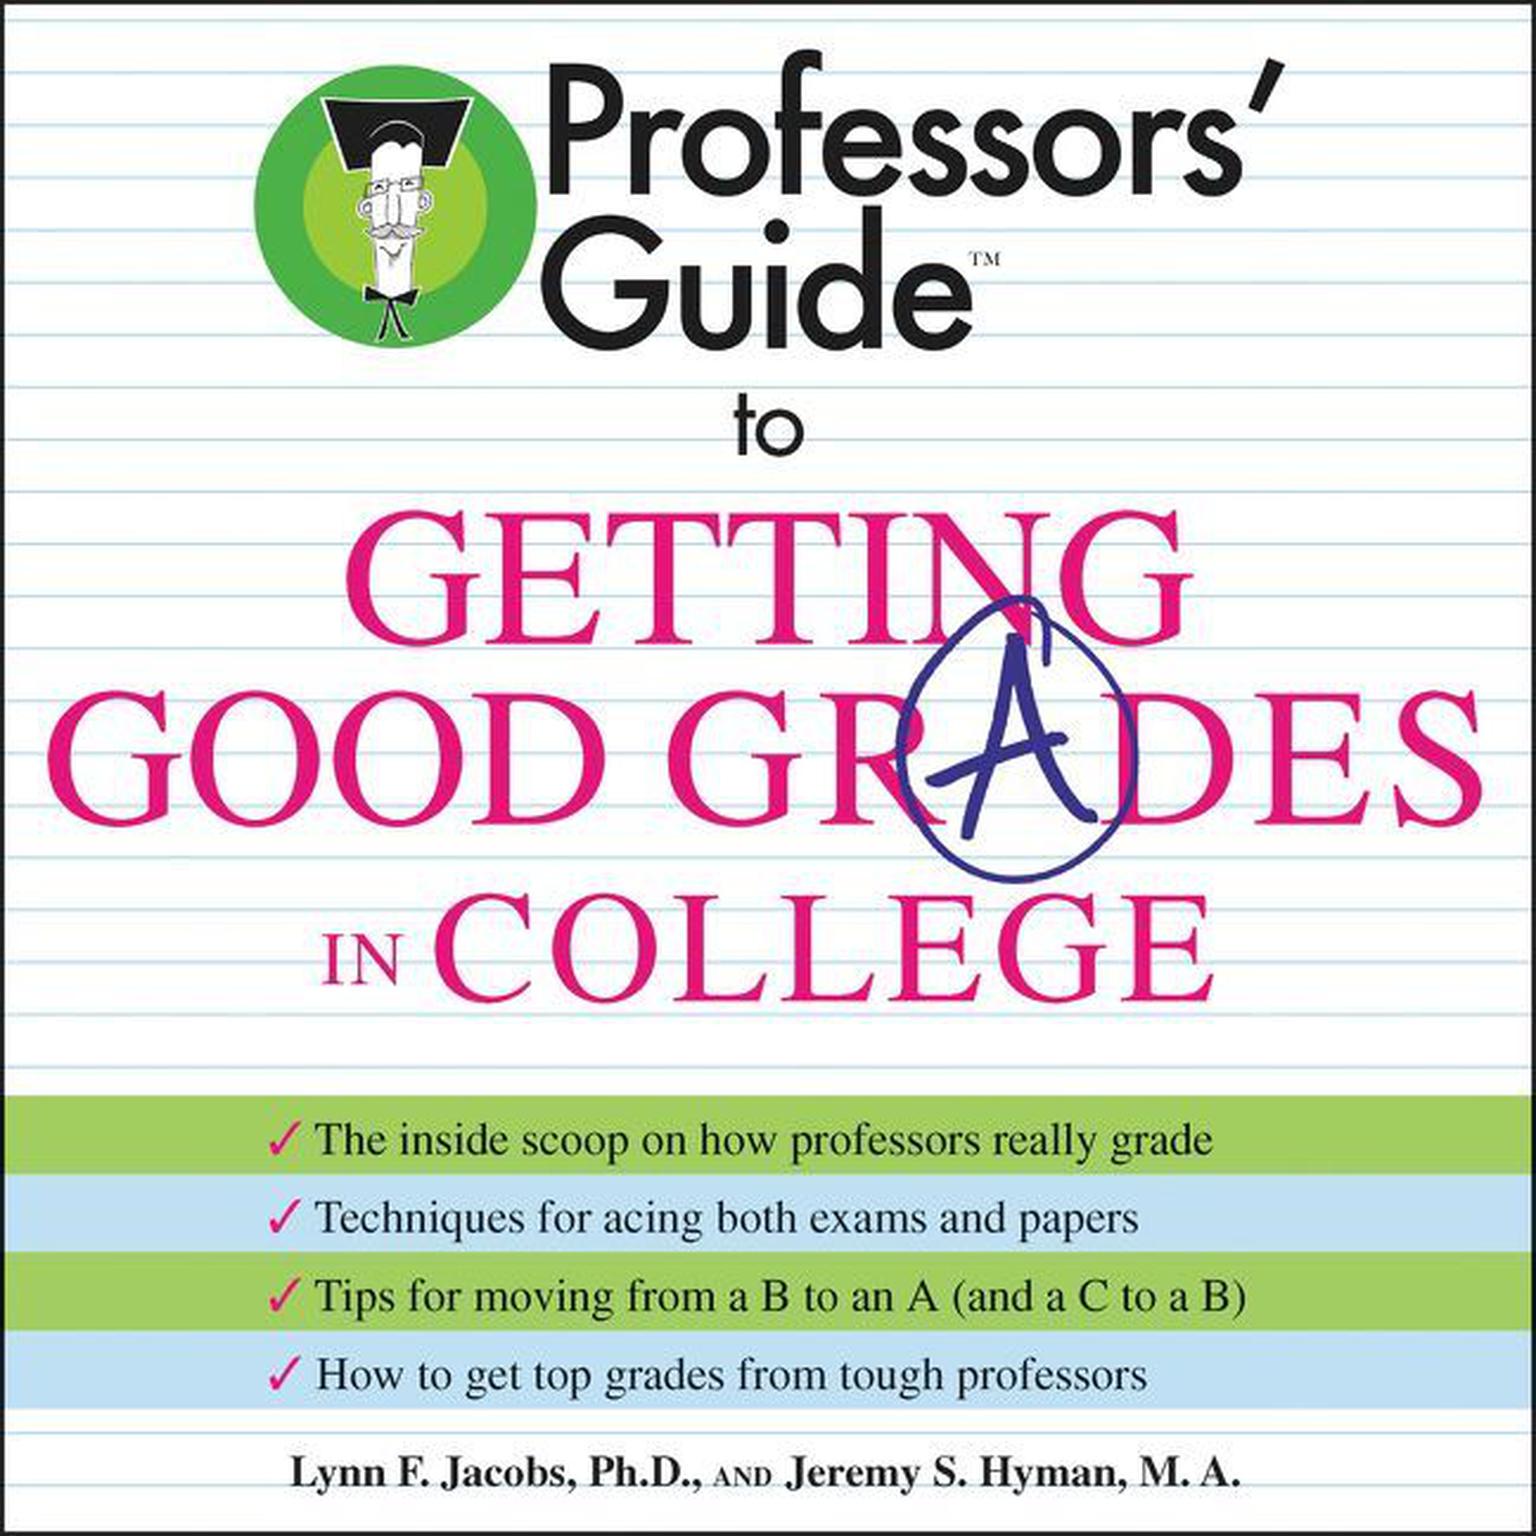 Professors Guide (TM) to Getting Good Grades in College (Abridged) Audiobook, by Lynn F. Jacobs